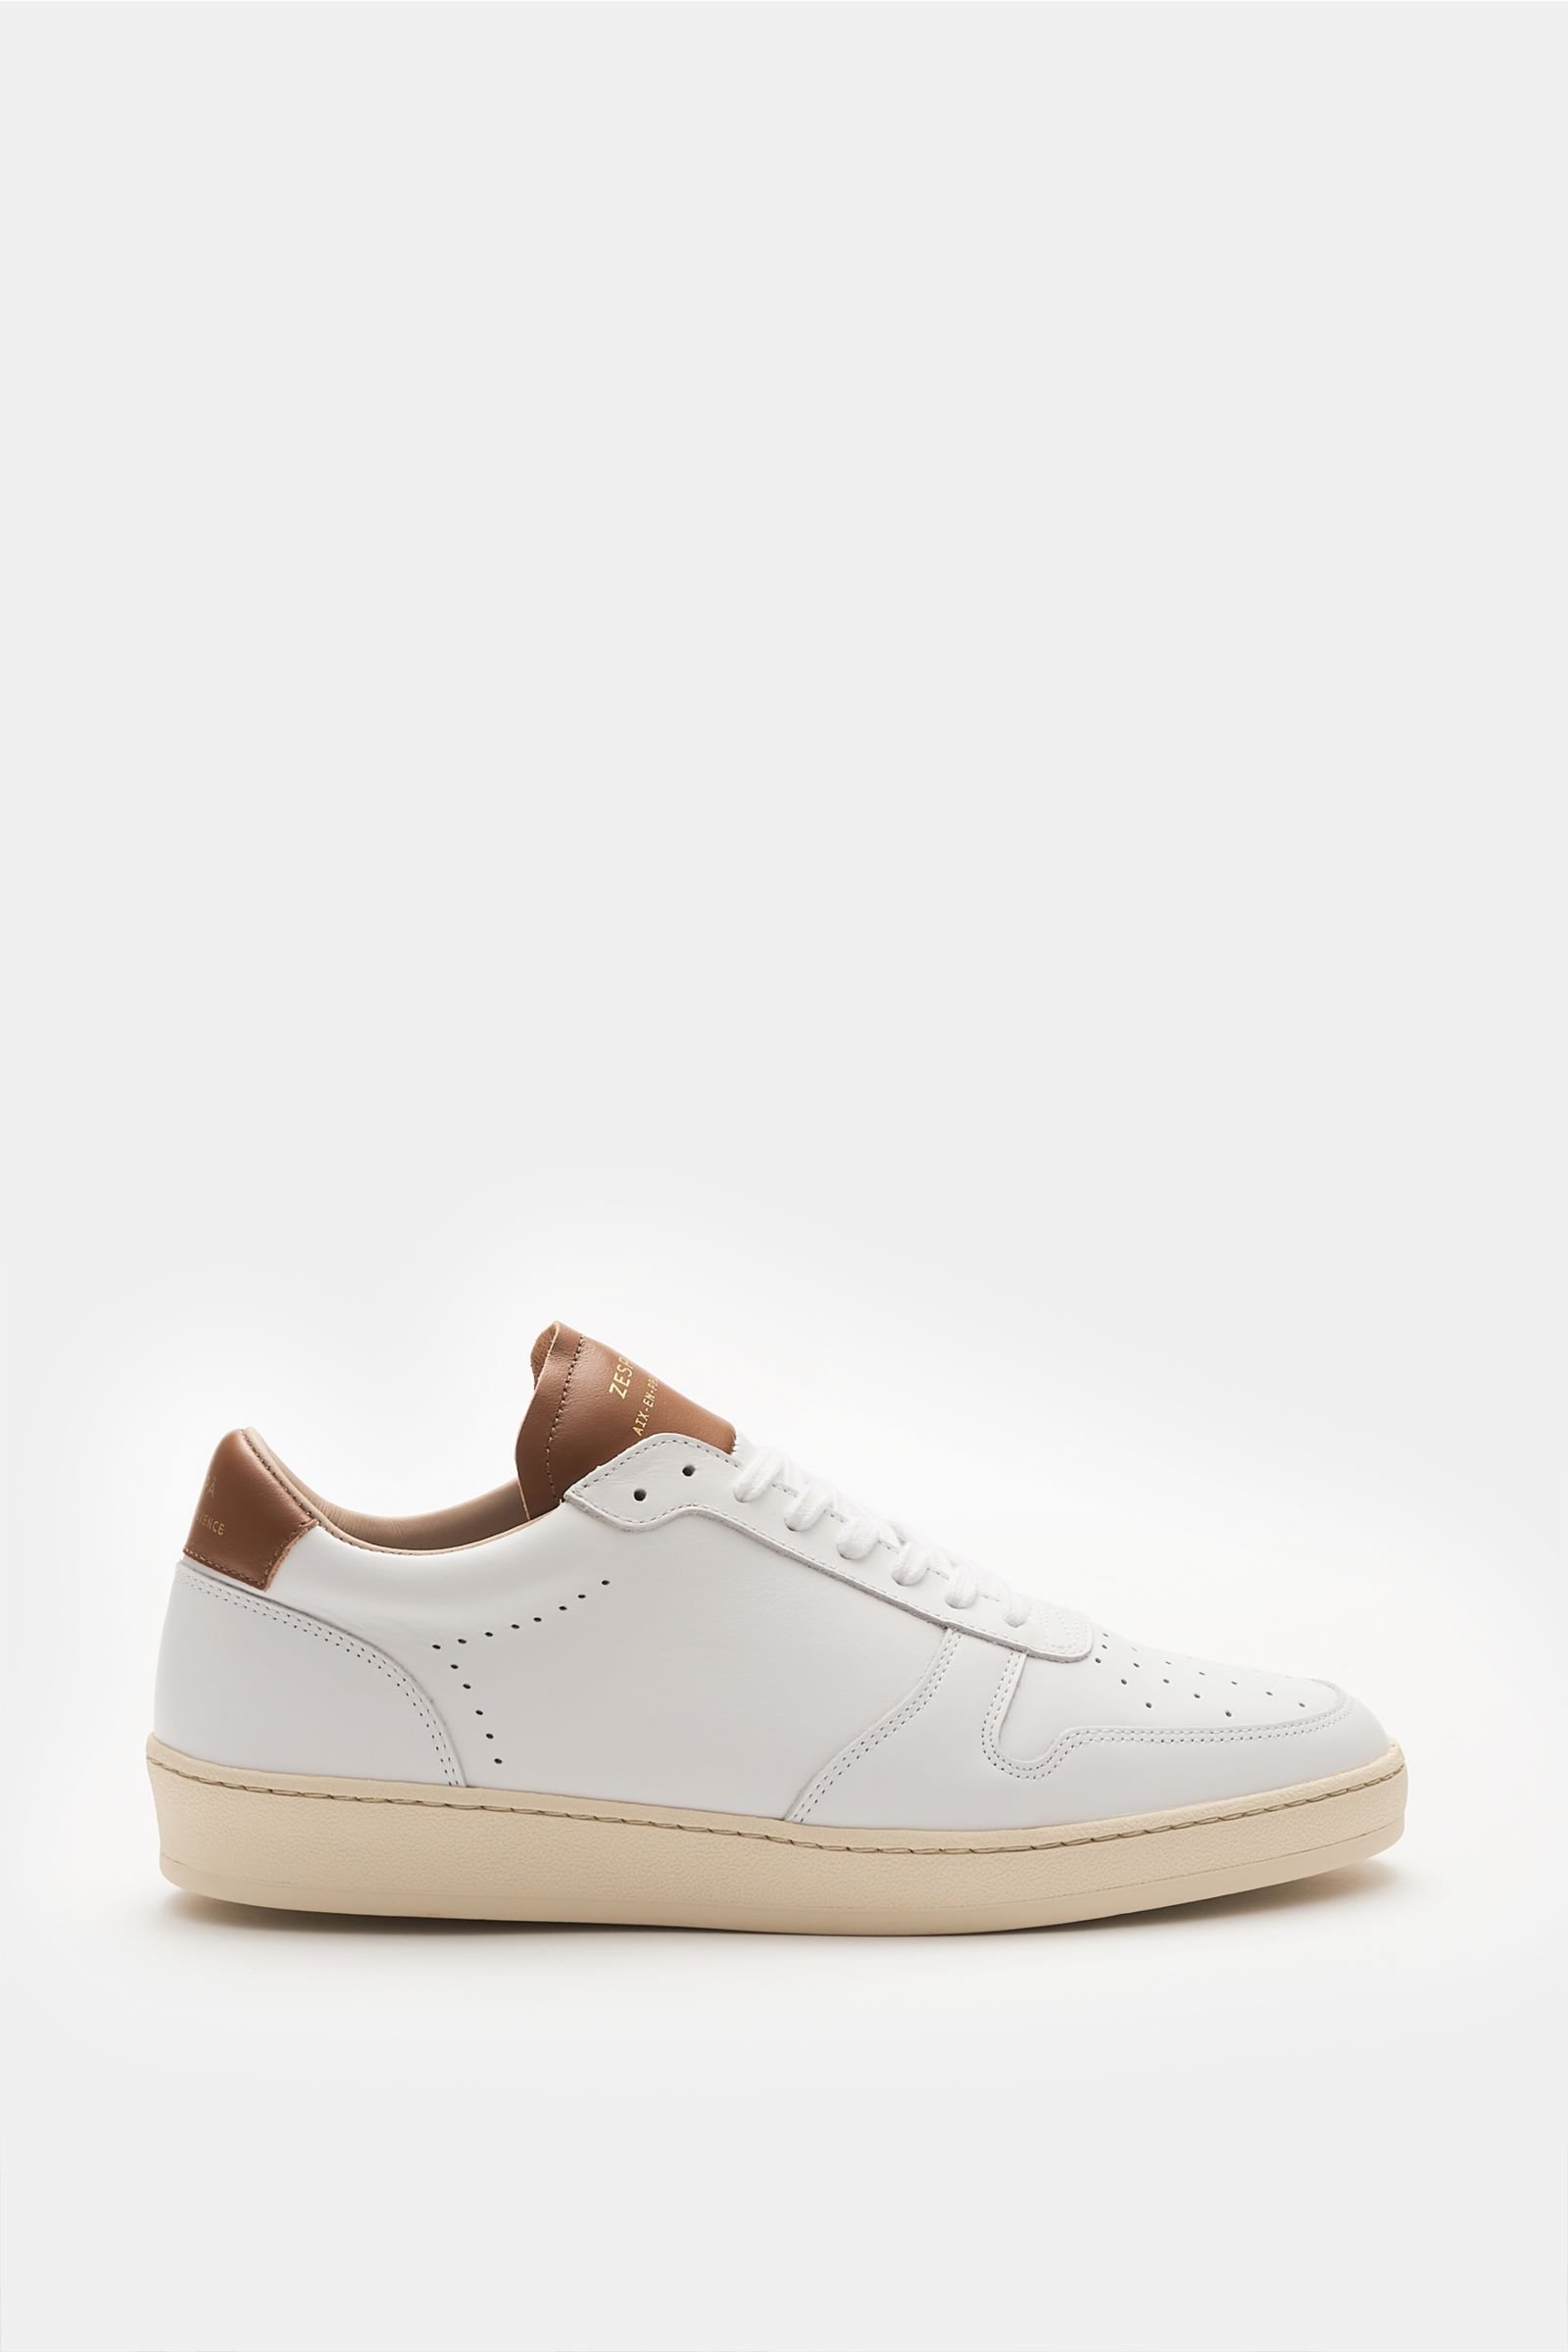 Sneakers 'ZSP23 APLA' white/brown